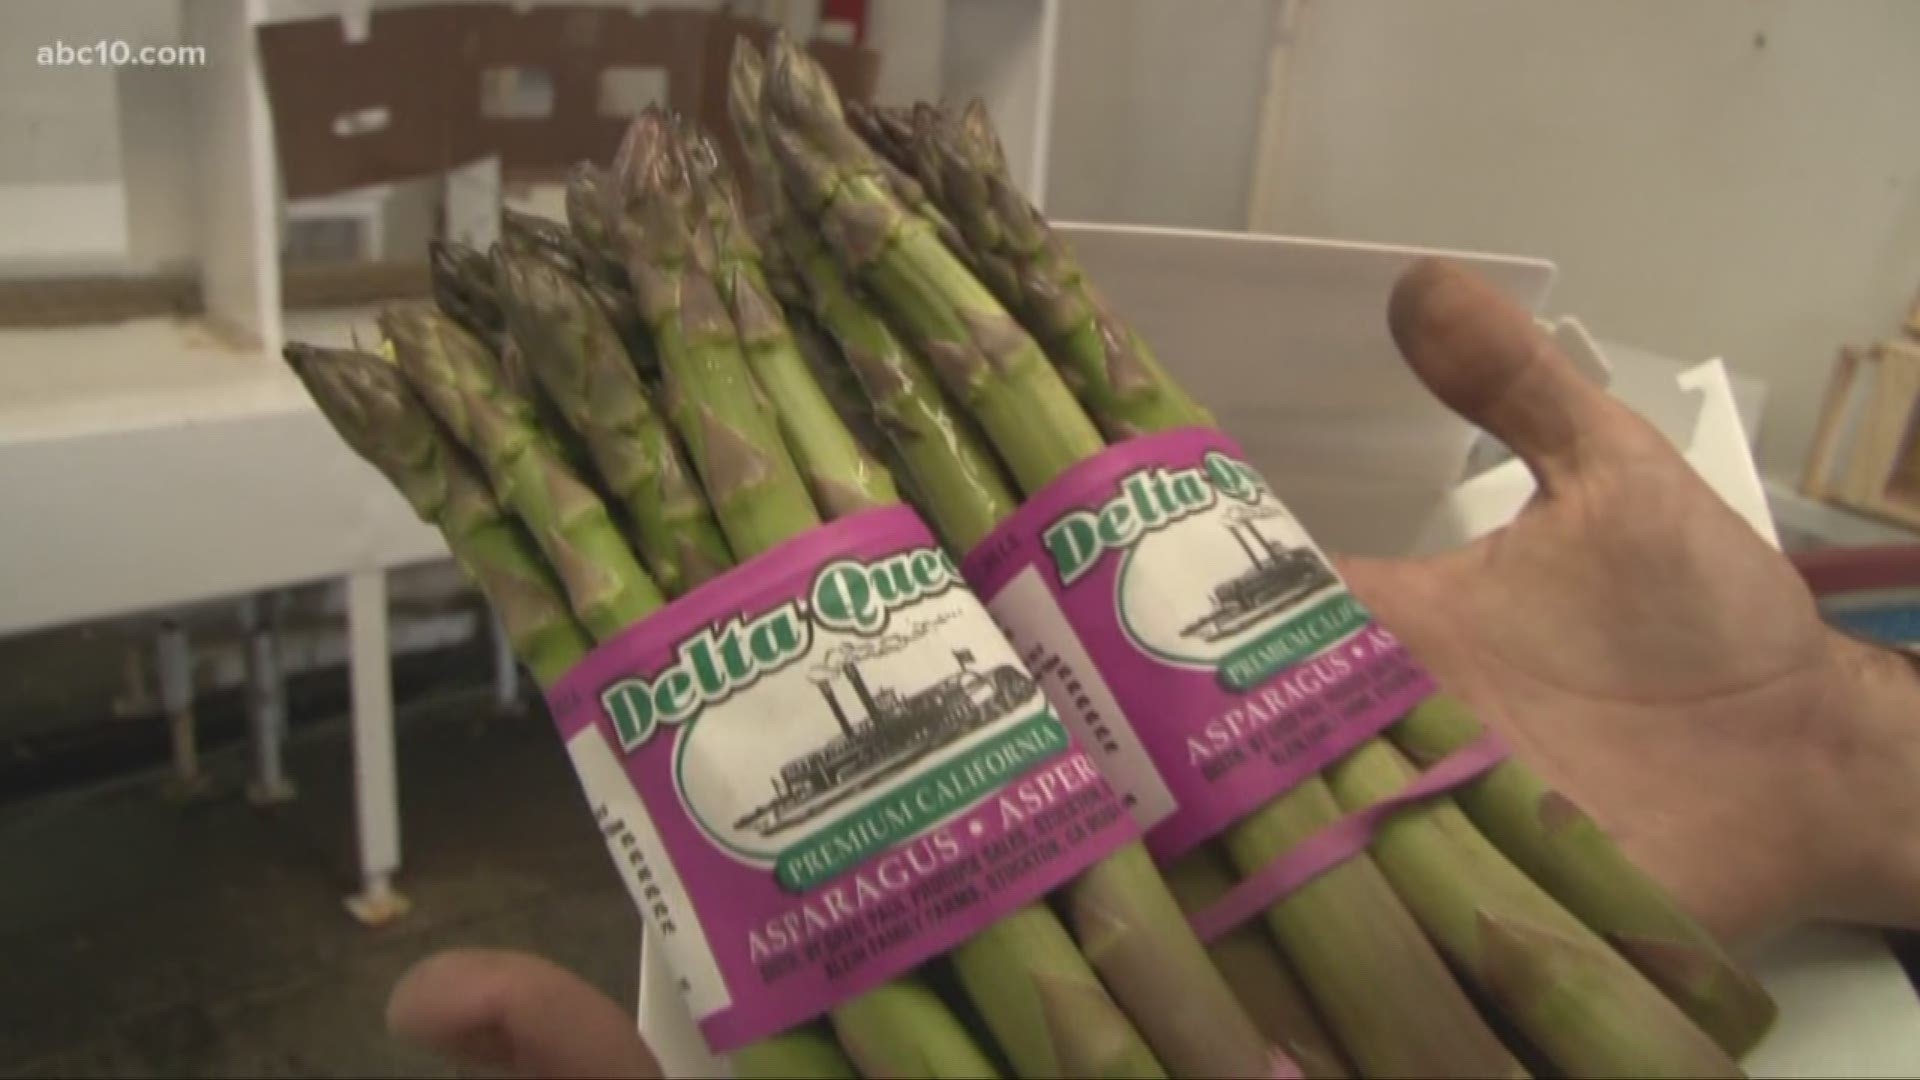 Despite Delta asparagus disappearing almost for good, the annual San Joaquin Asparagus Festival set for next weekend will go on - with California grown asparagus.